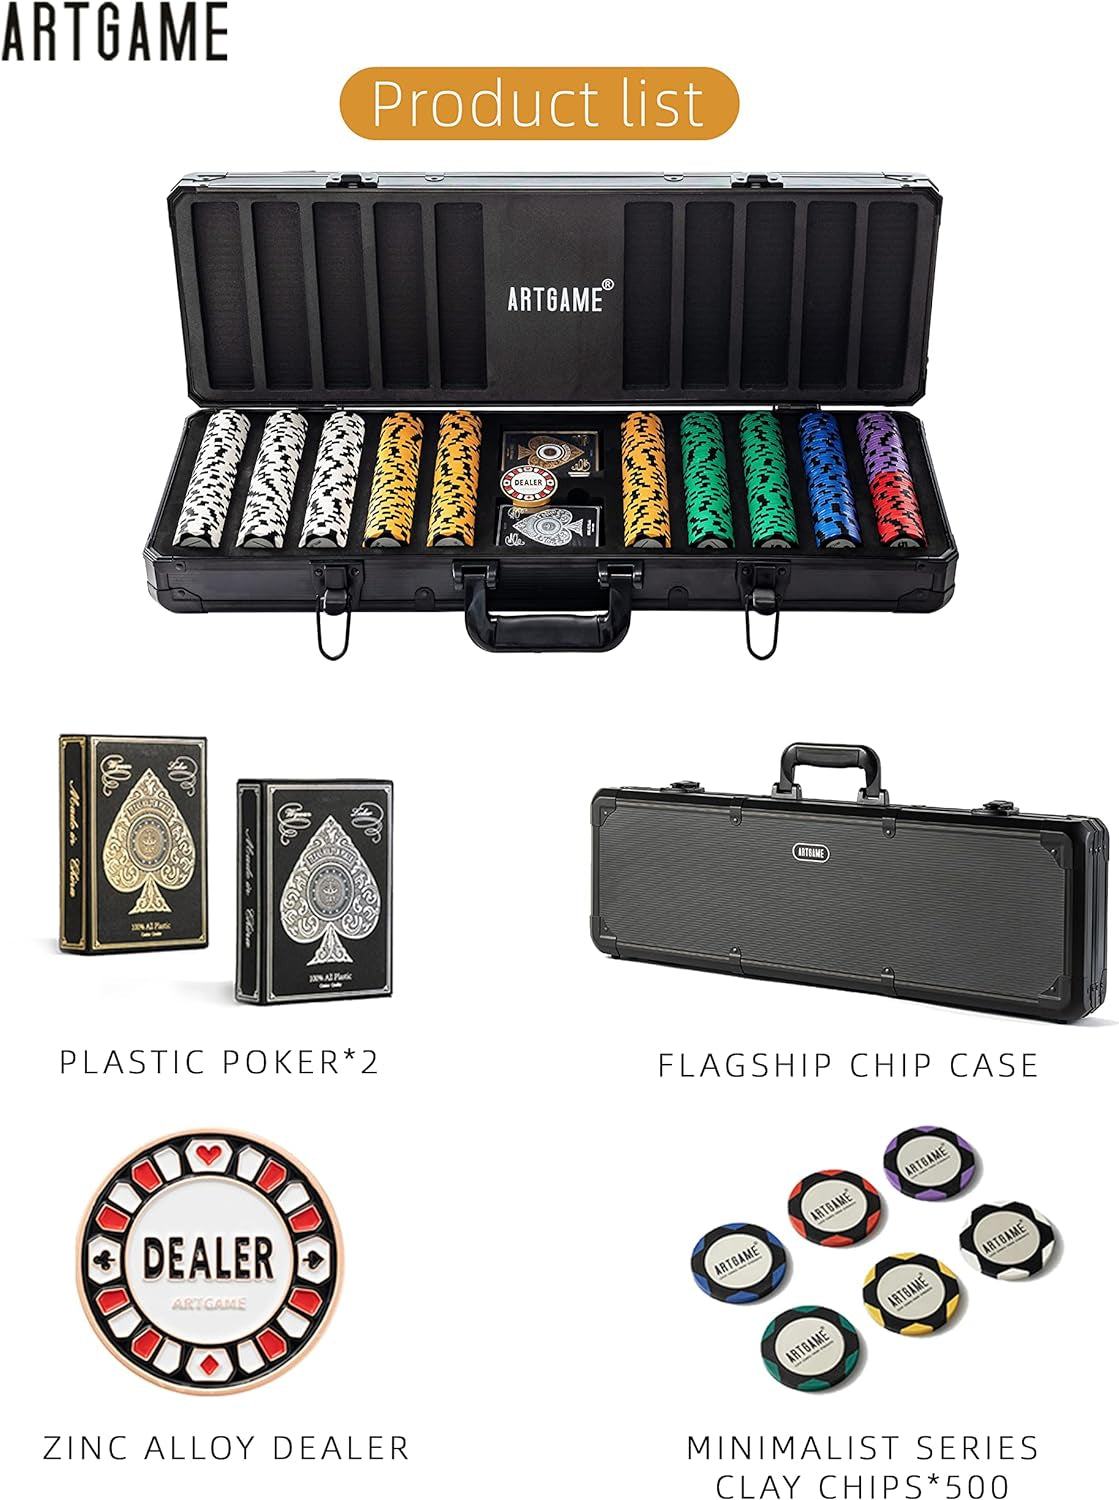 14 Gram Clay Poker Chip Set for Texas Hold’Em, 500Pcs Casino Style Chips, with K-Type Aluminum Case and Dealer Buttons.